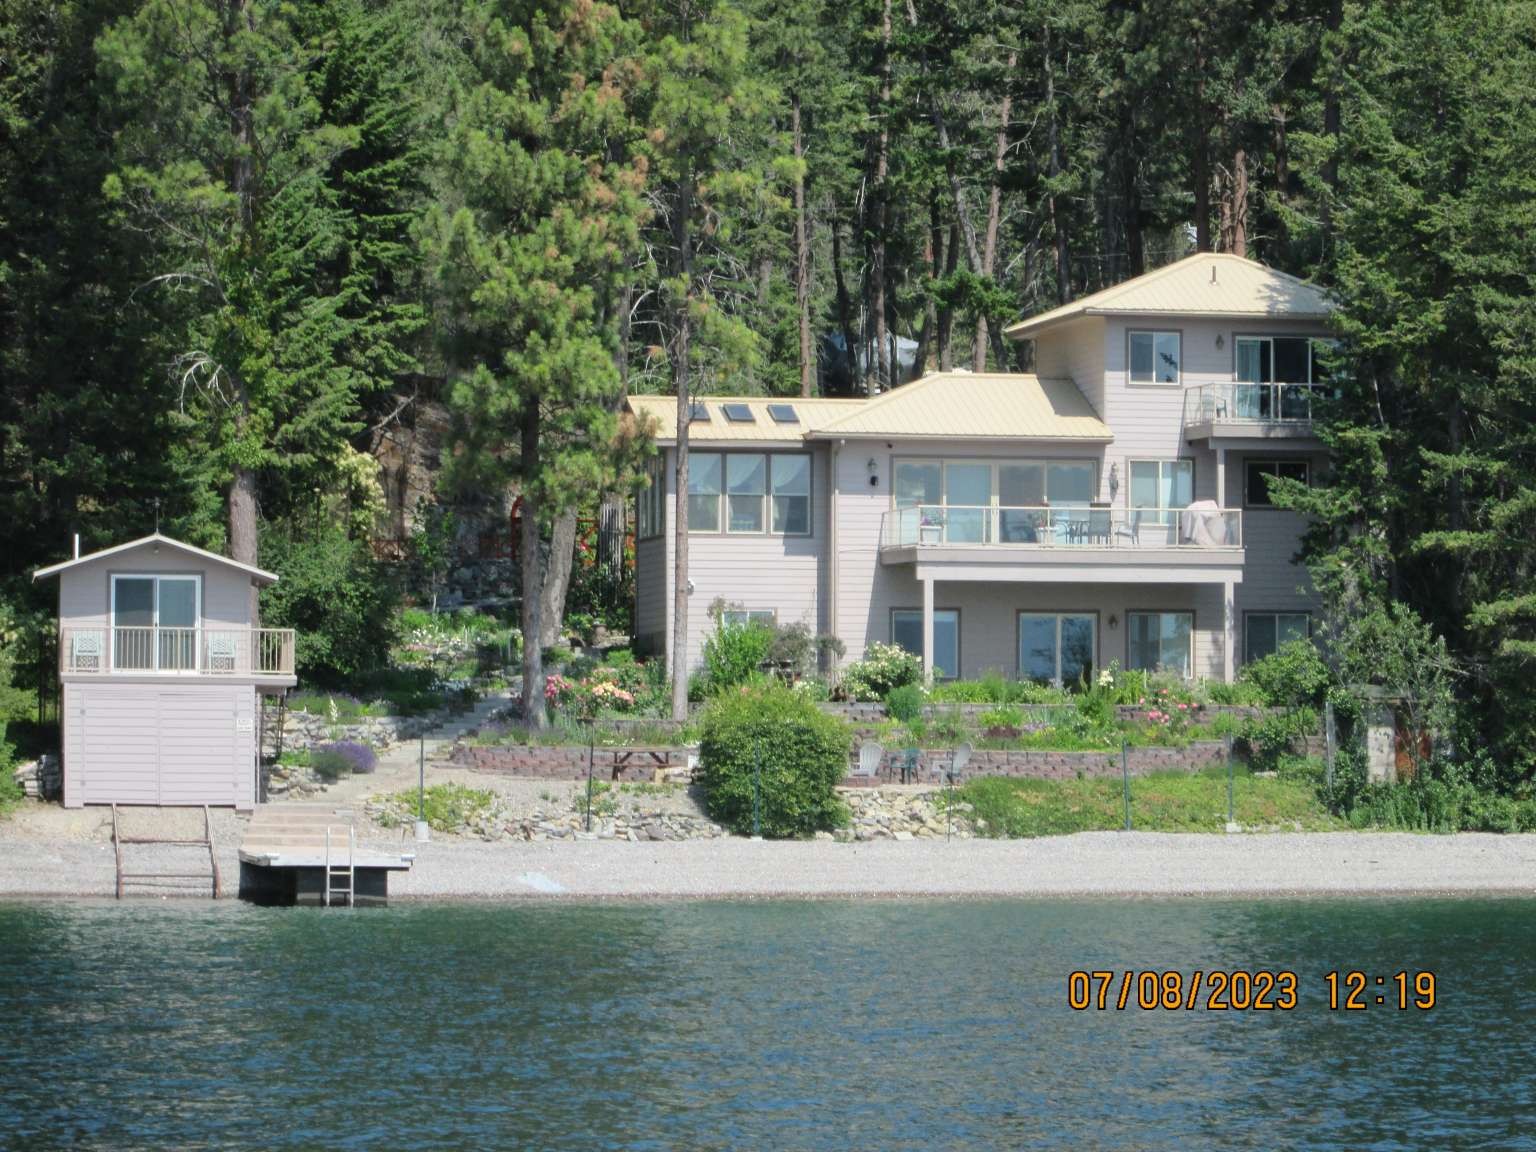 This is one of the best view properties Flathead Lake has to offer. A real gem! A southern view with a gentle sloping  gravel beach, a newer cement dock, enclosed boathouse with a rail boat launching system and guest quarters with a full bath, complement this beautiful property. The main house has three bedrooms, 2.5 baths and a two-car attached garage. A cozy guest/hobby shop cabin is attached to the garage. The property also has a 34 x 40 finished shop and full bathroom. The main house has a large daylight basement, a main floor living area and a third story primary bedroom suite. The entire property is enclosed in a 6 foot chain-link fence to protect the fabulous landscaping. The property has water rights for both the well and lake usage.